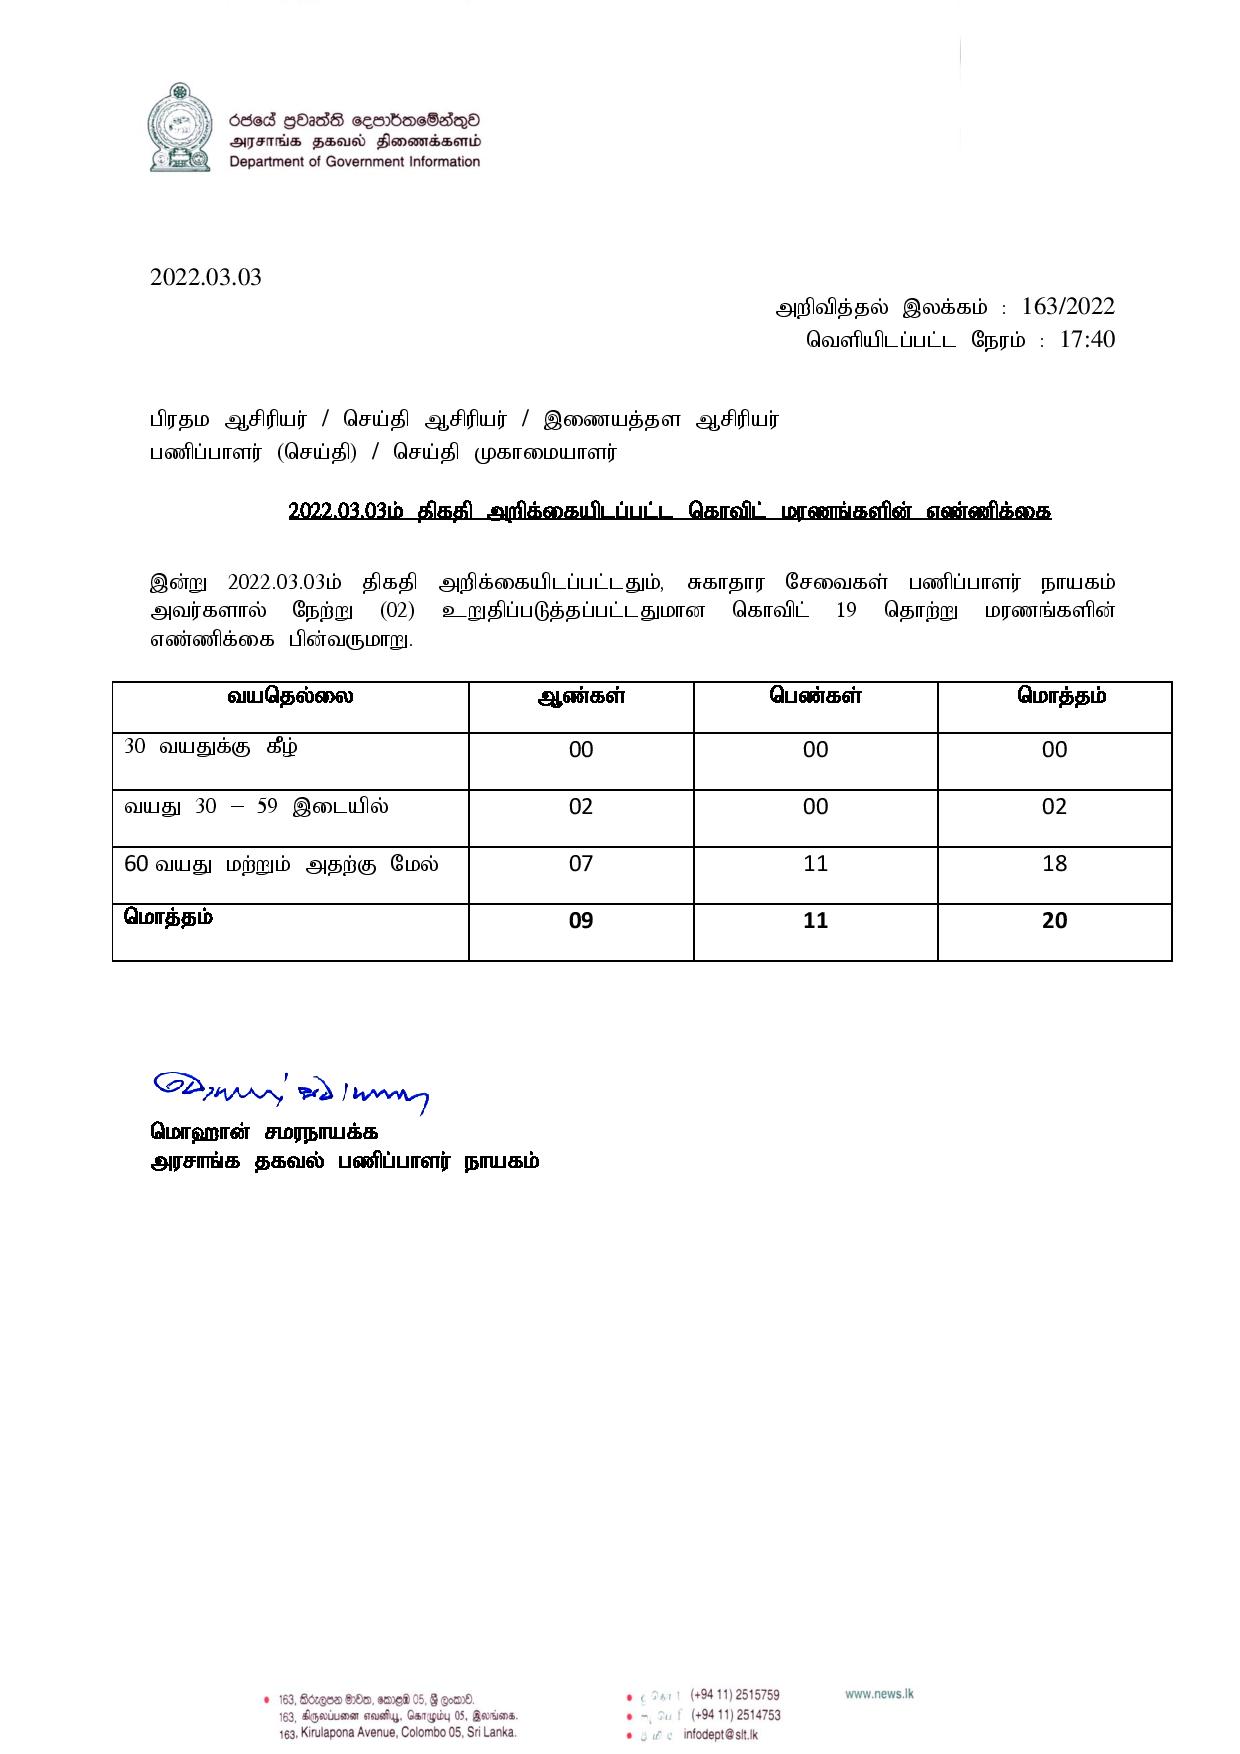 Press Release 163 Tamil page 001